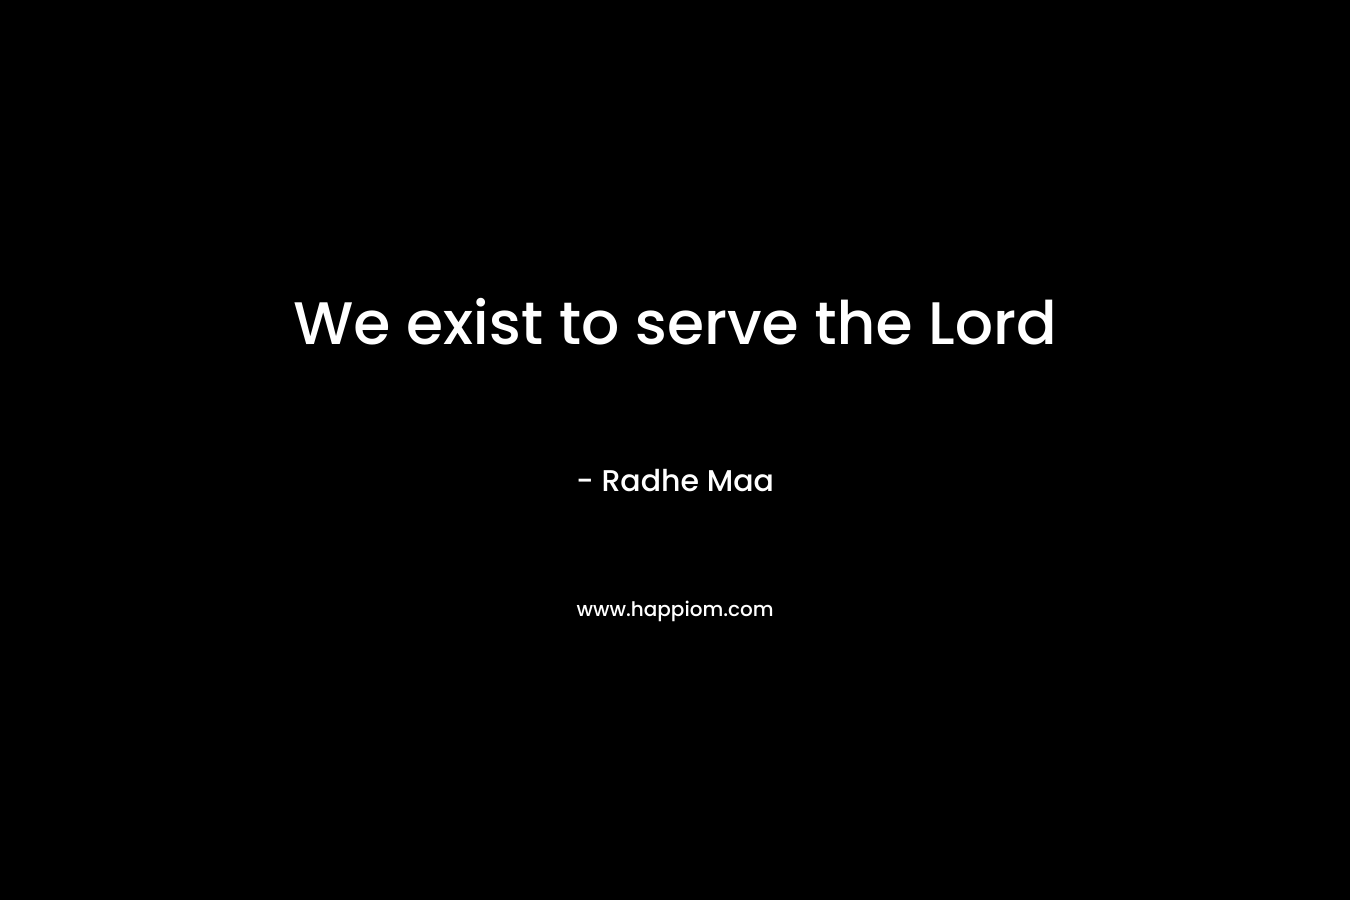 We exist to serve the Lord